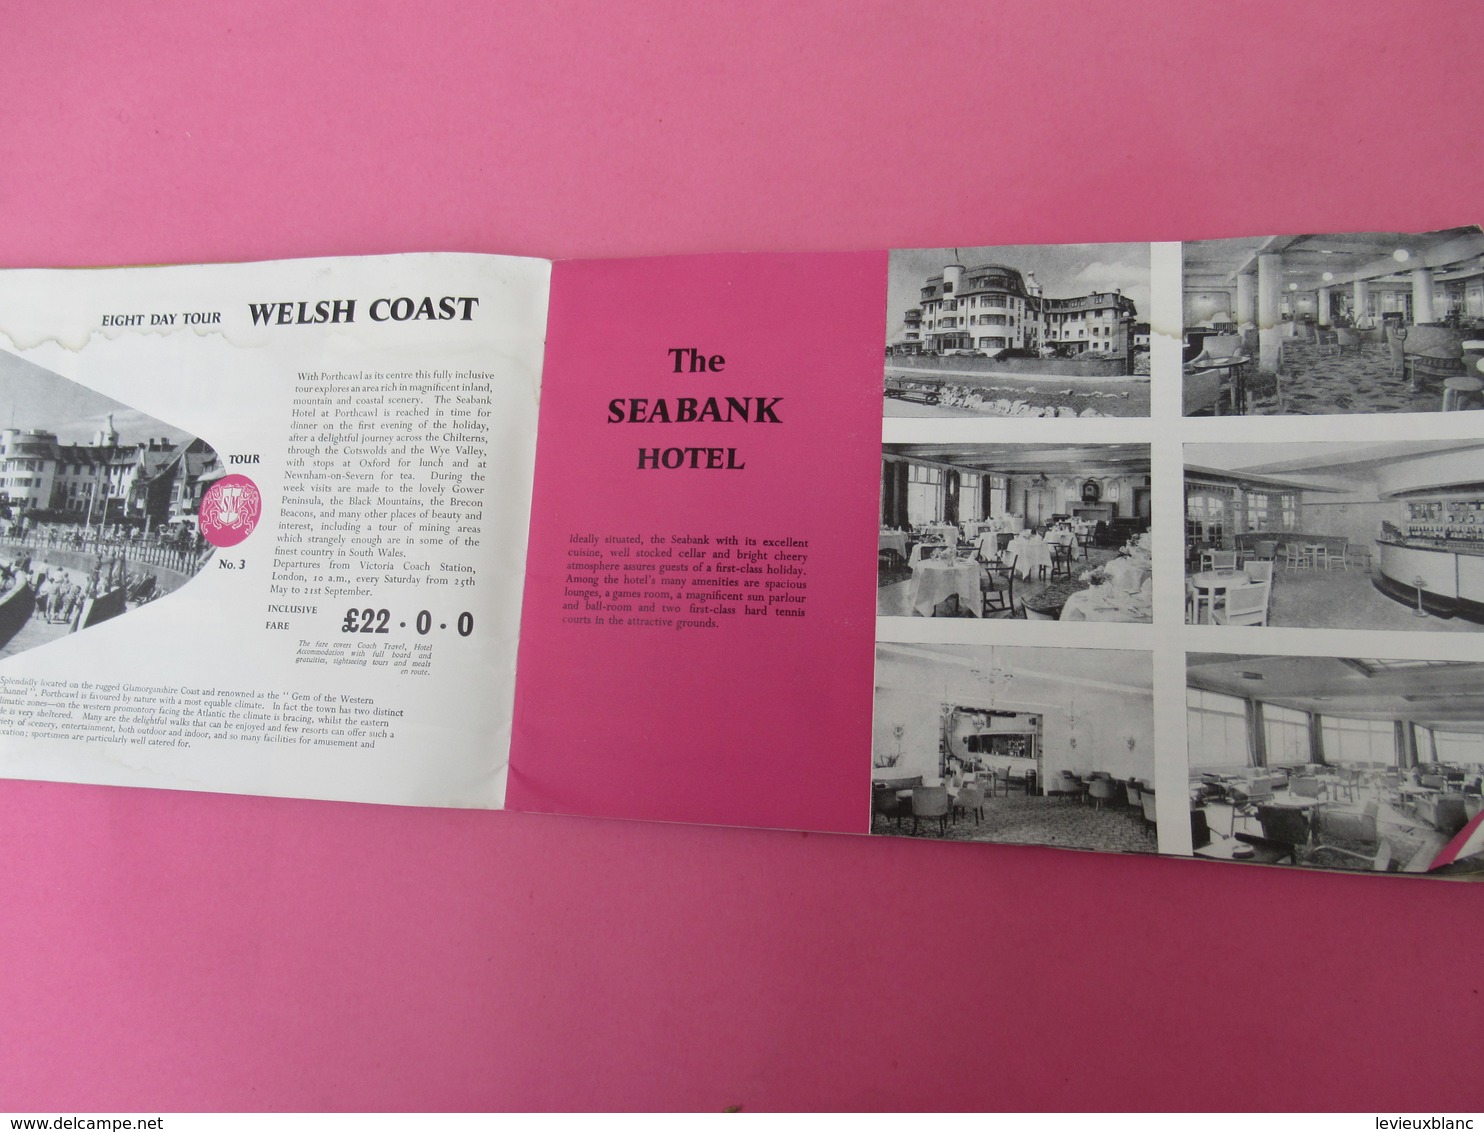 Fascicule/Catalogue/Angleterre/South Midland/ Coach Touring In Britain/ /1957  PGC334 - Dépliants Turistici